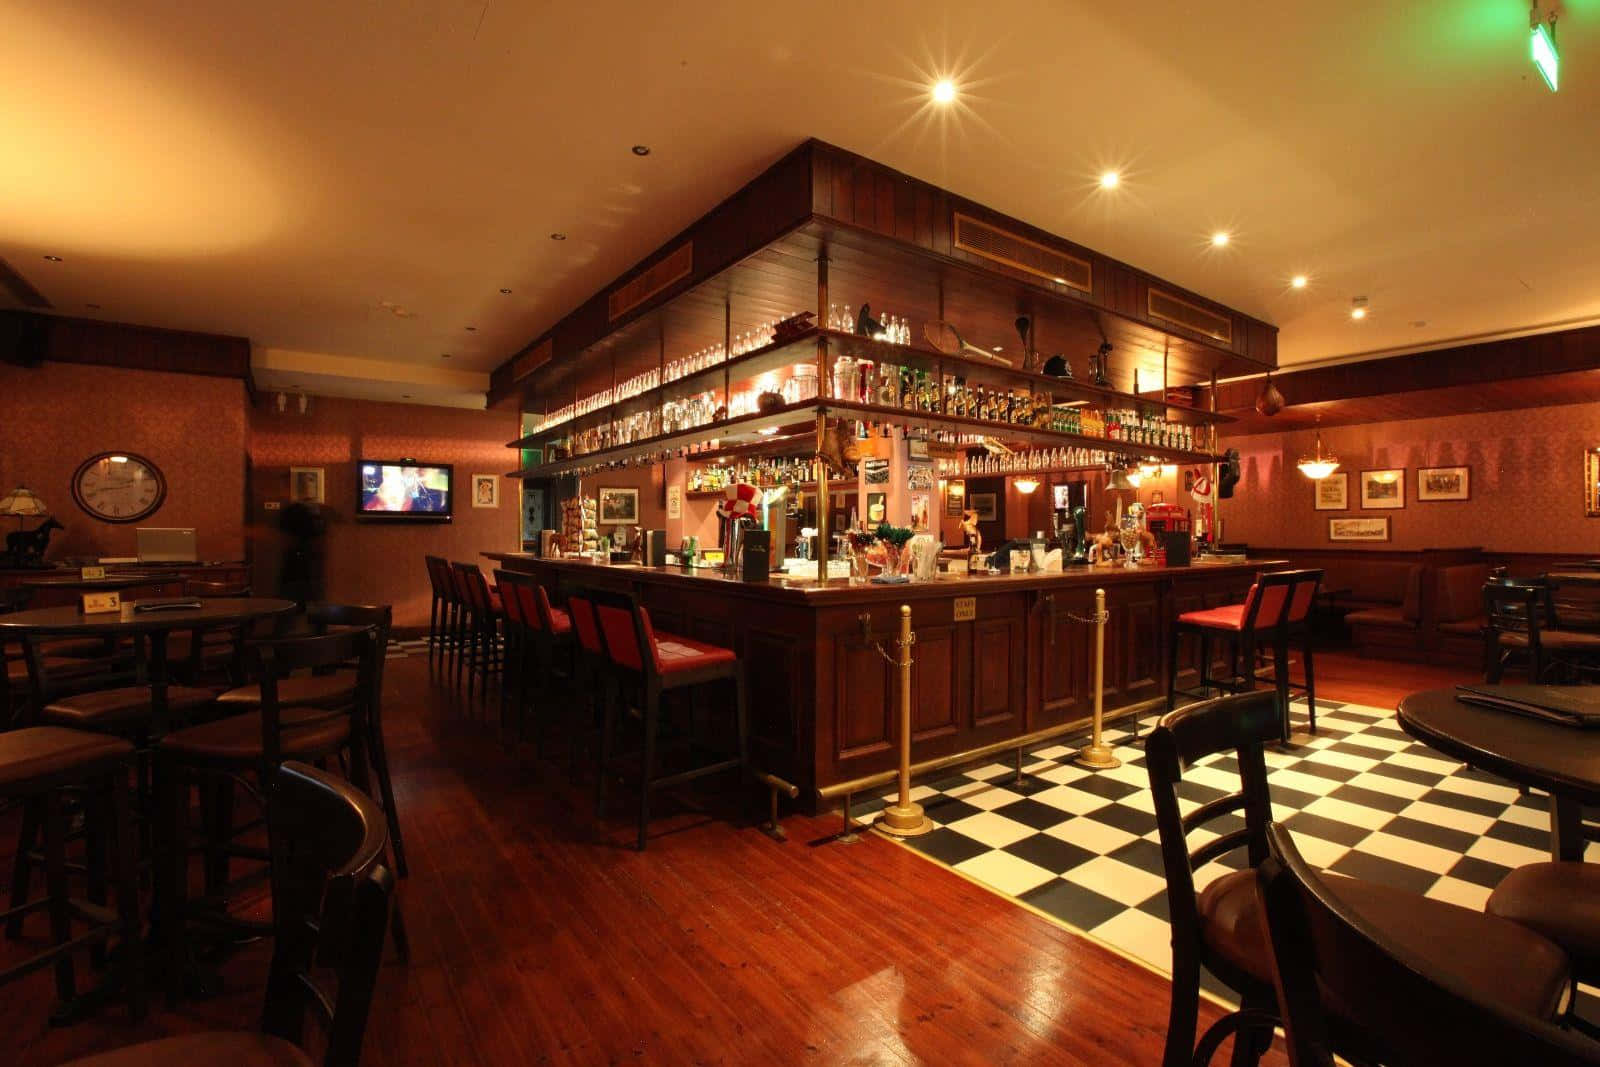 A Bar With A Checkered Floor And Wooden Tables